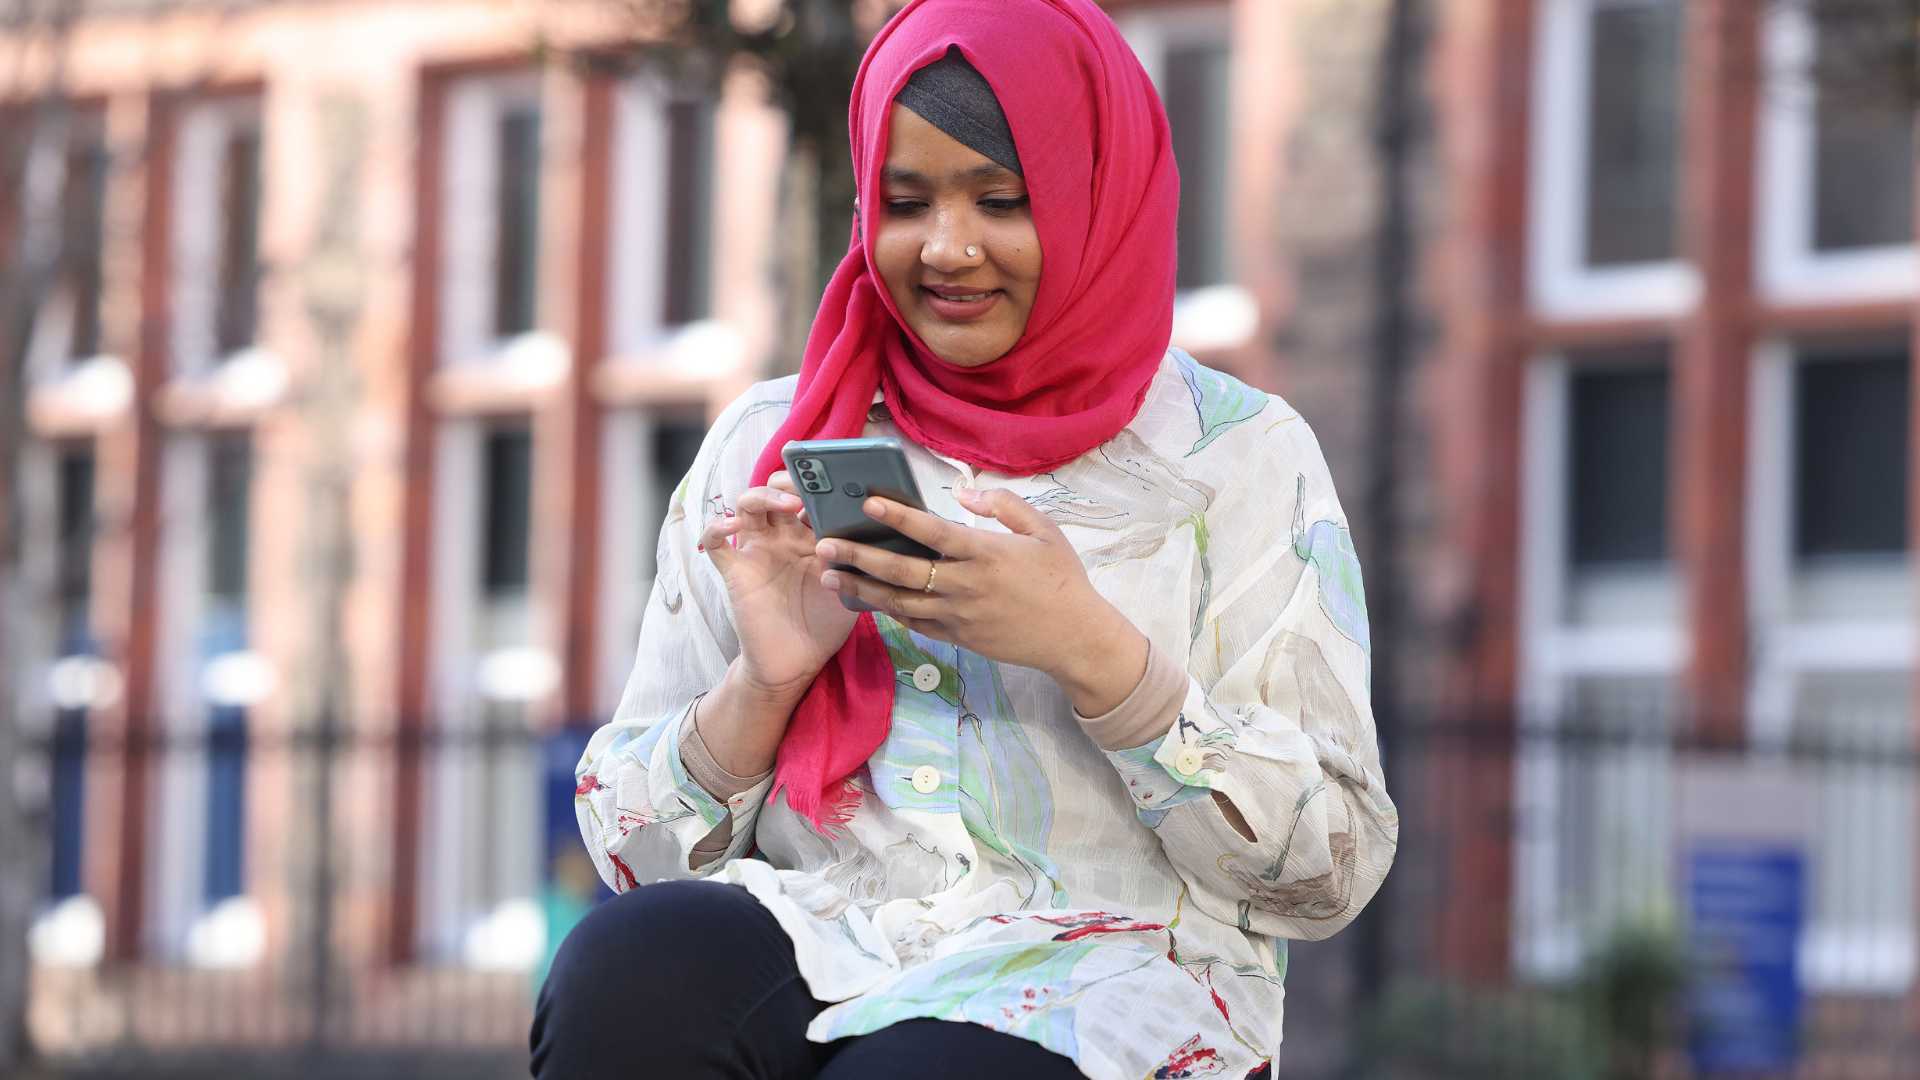 A student looking at her phone smiling